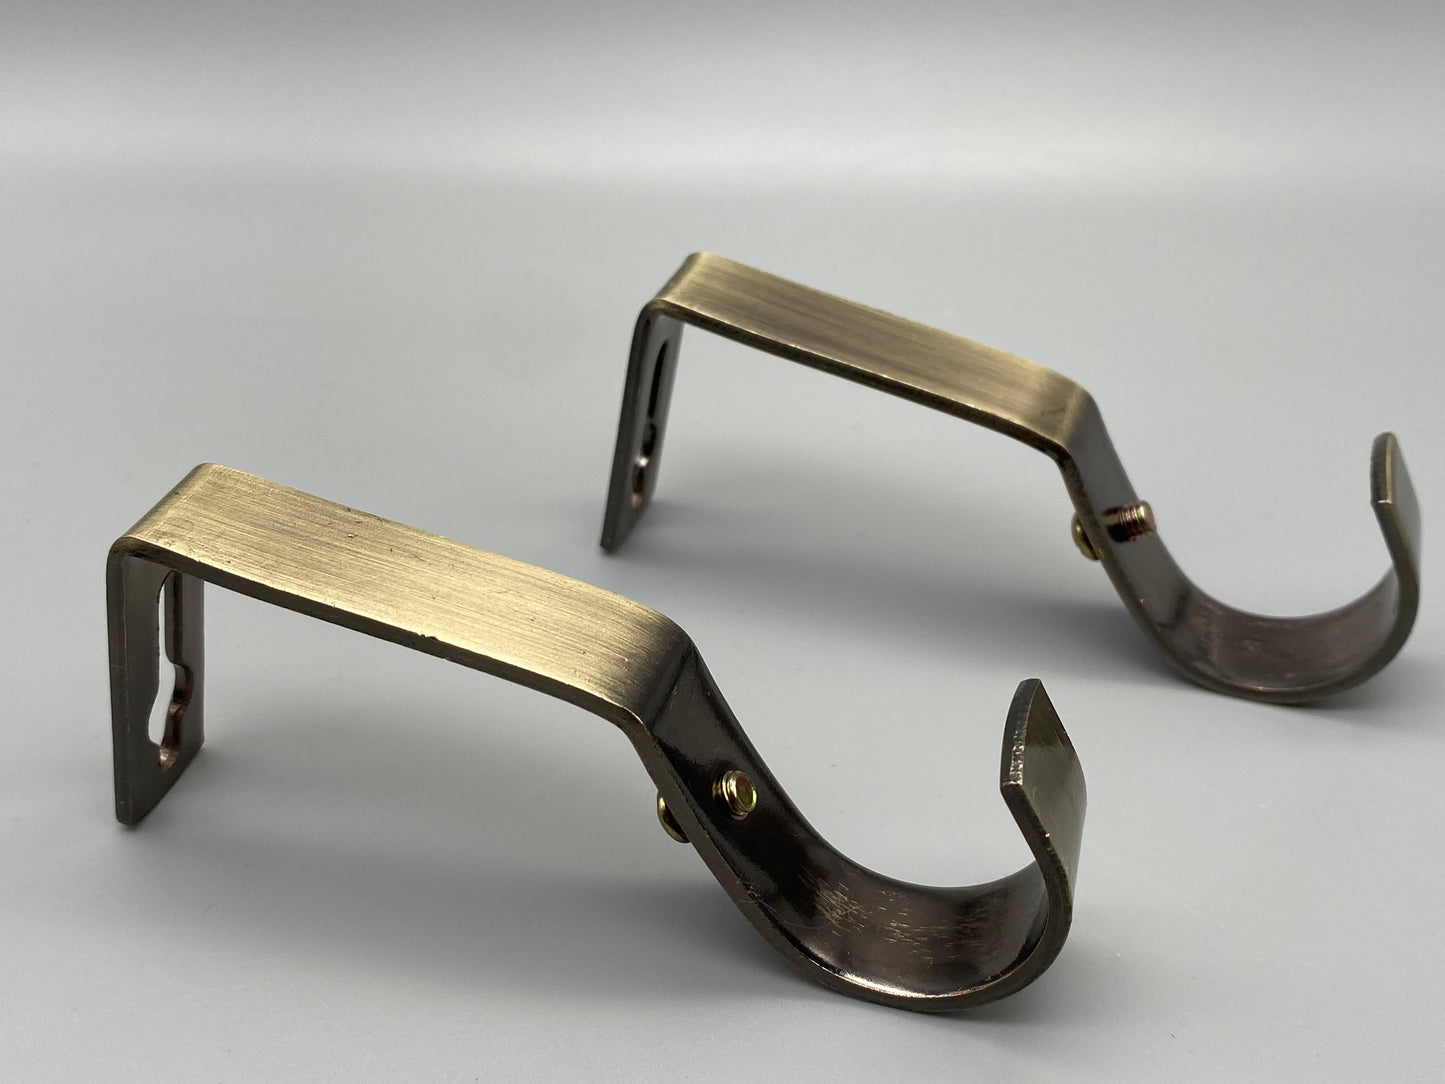 Pair of Heavy Duty Metal Curtain Pole Brackets - Holds Rods upto 30mm - Wall Brackets Holder (Antique Gold)